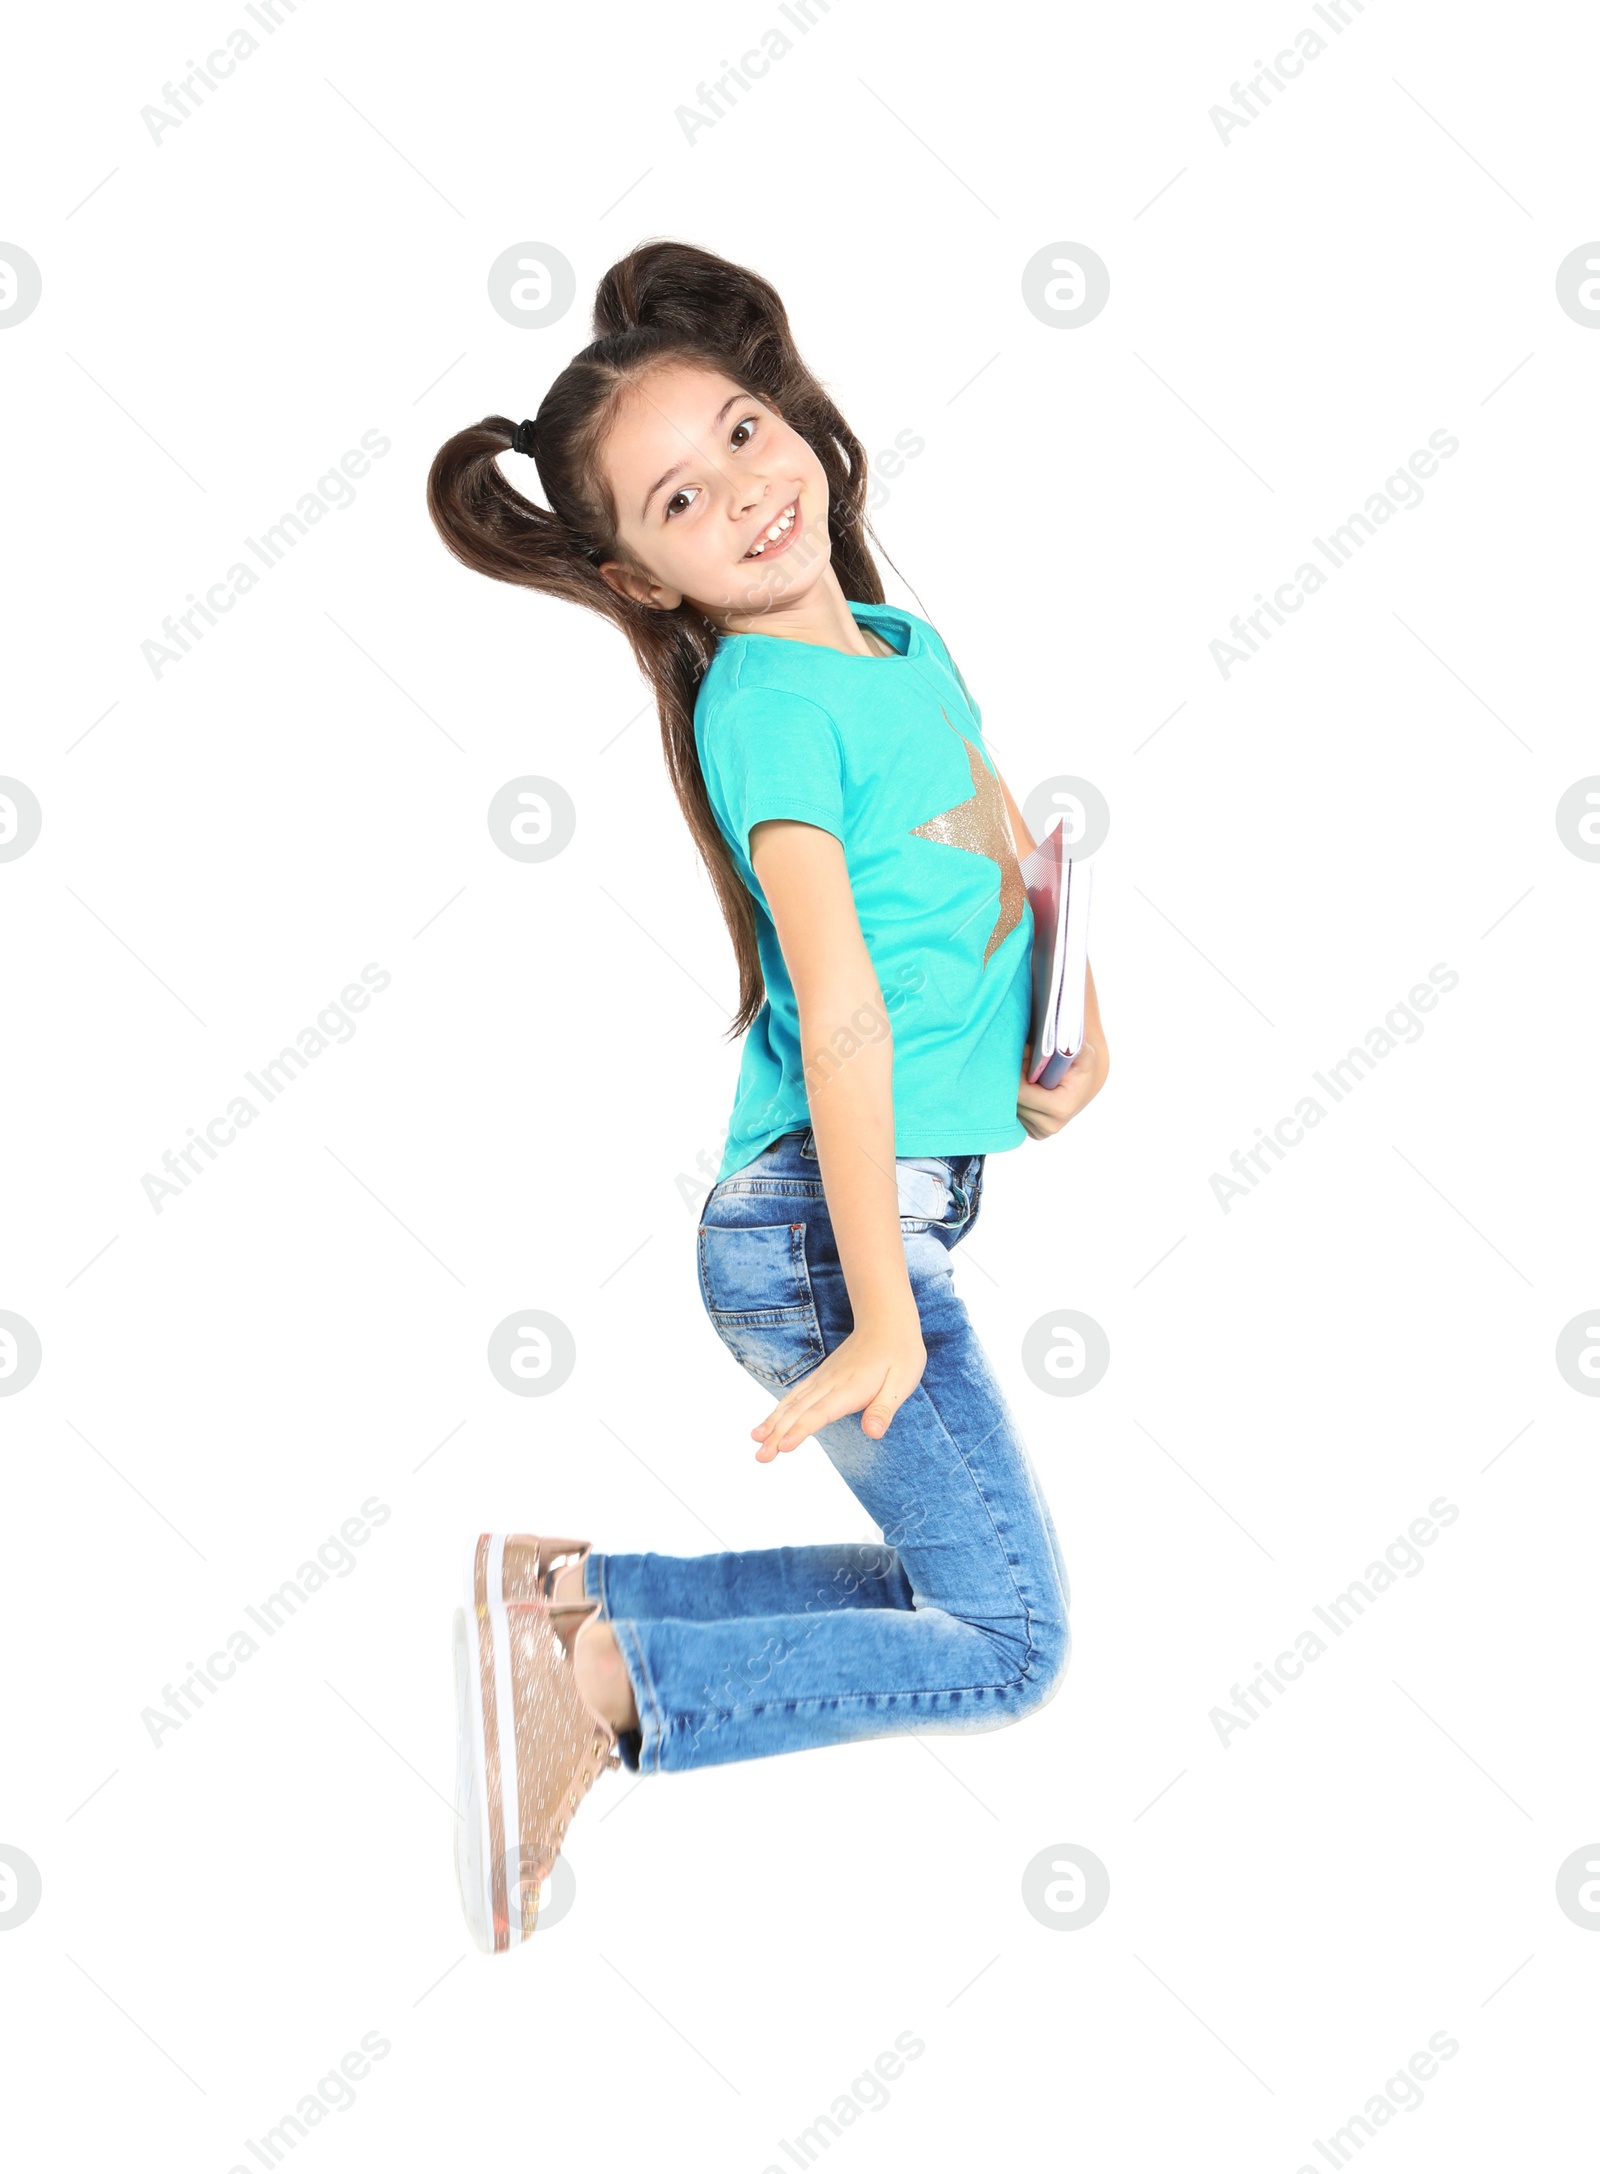 Photo of Little child with school supplies on white background